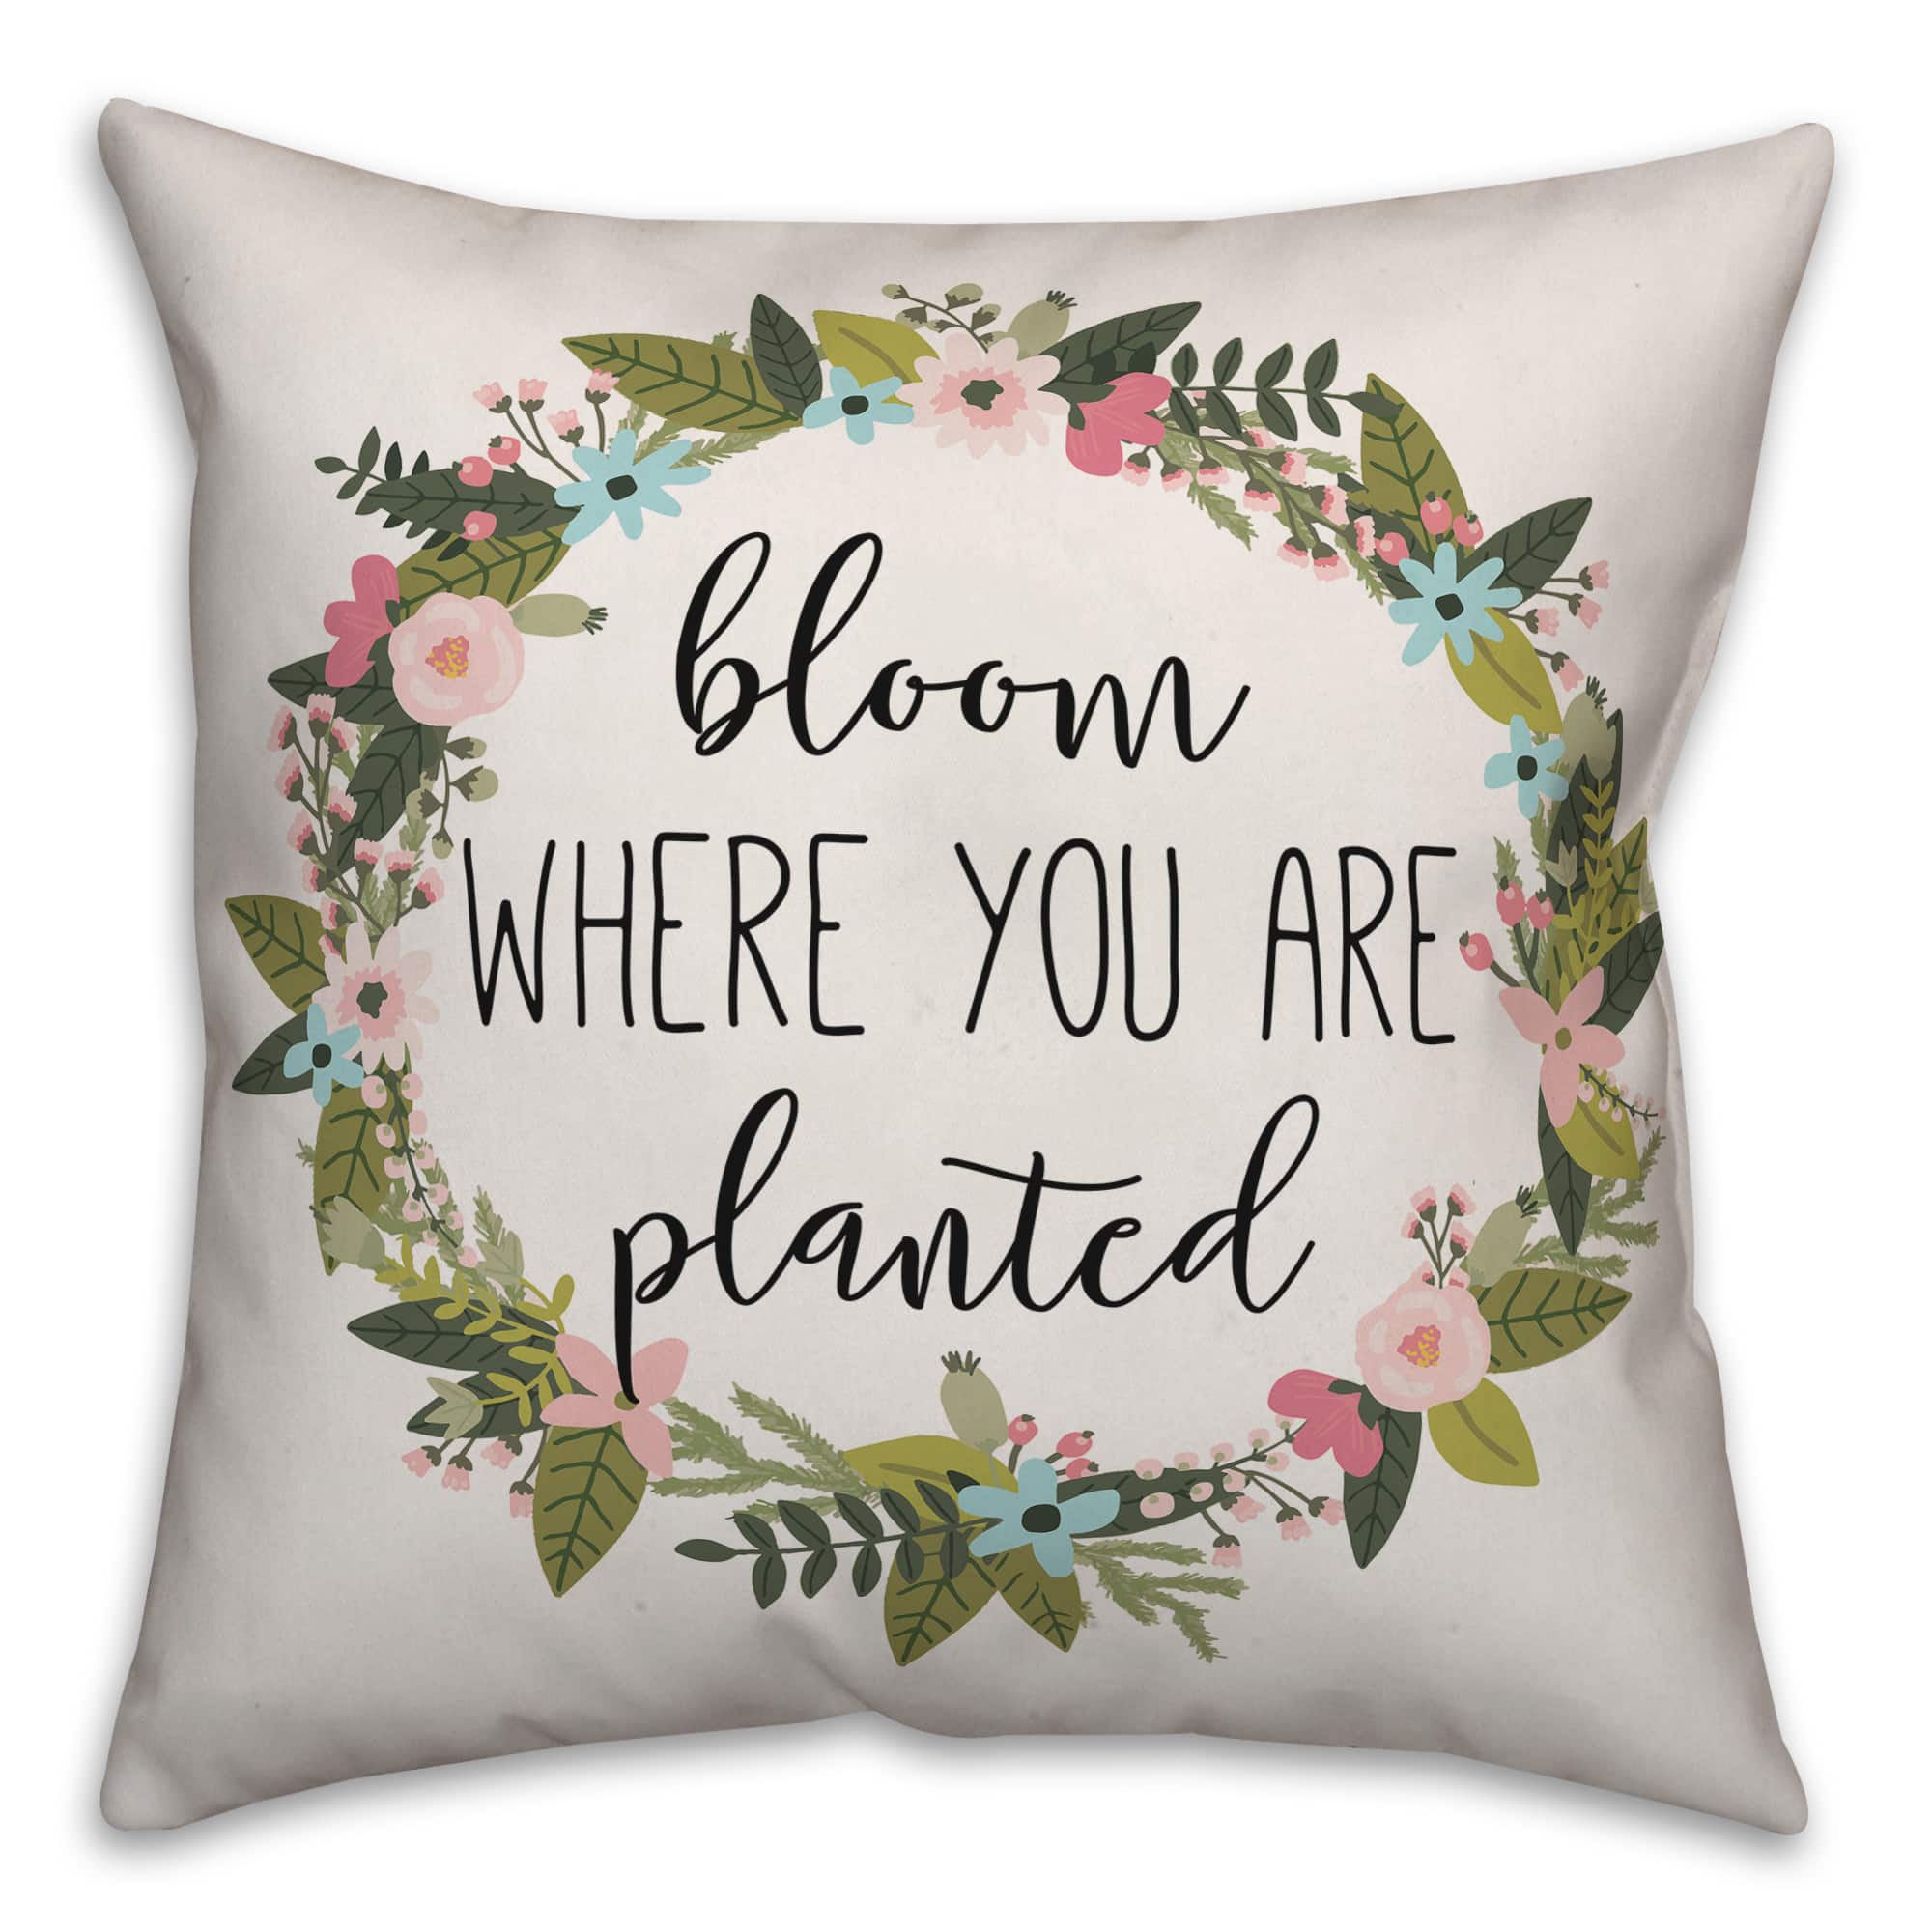 Get the Bloom Where You Are Planted Throw Pillow at Michaels